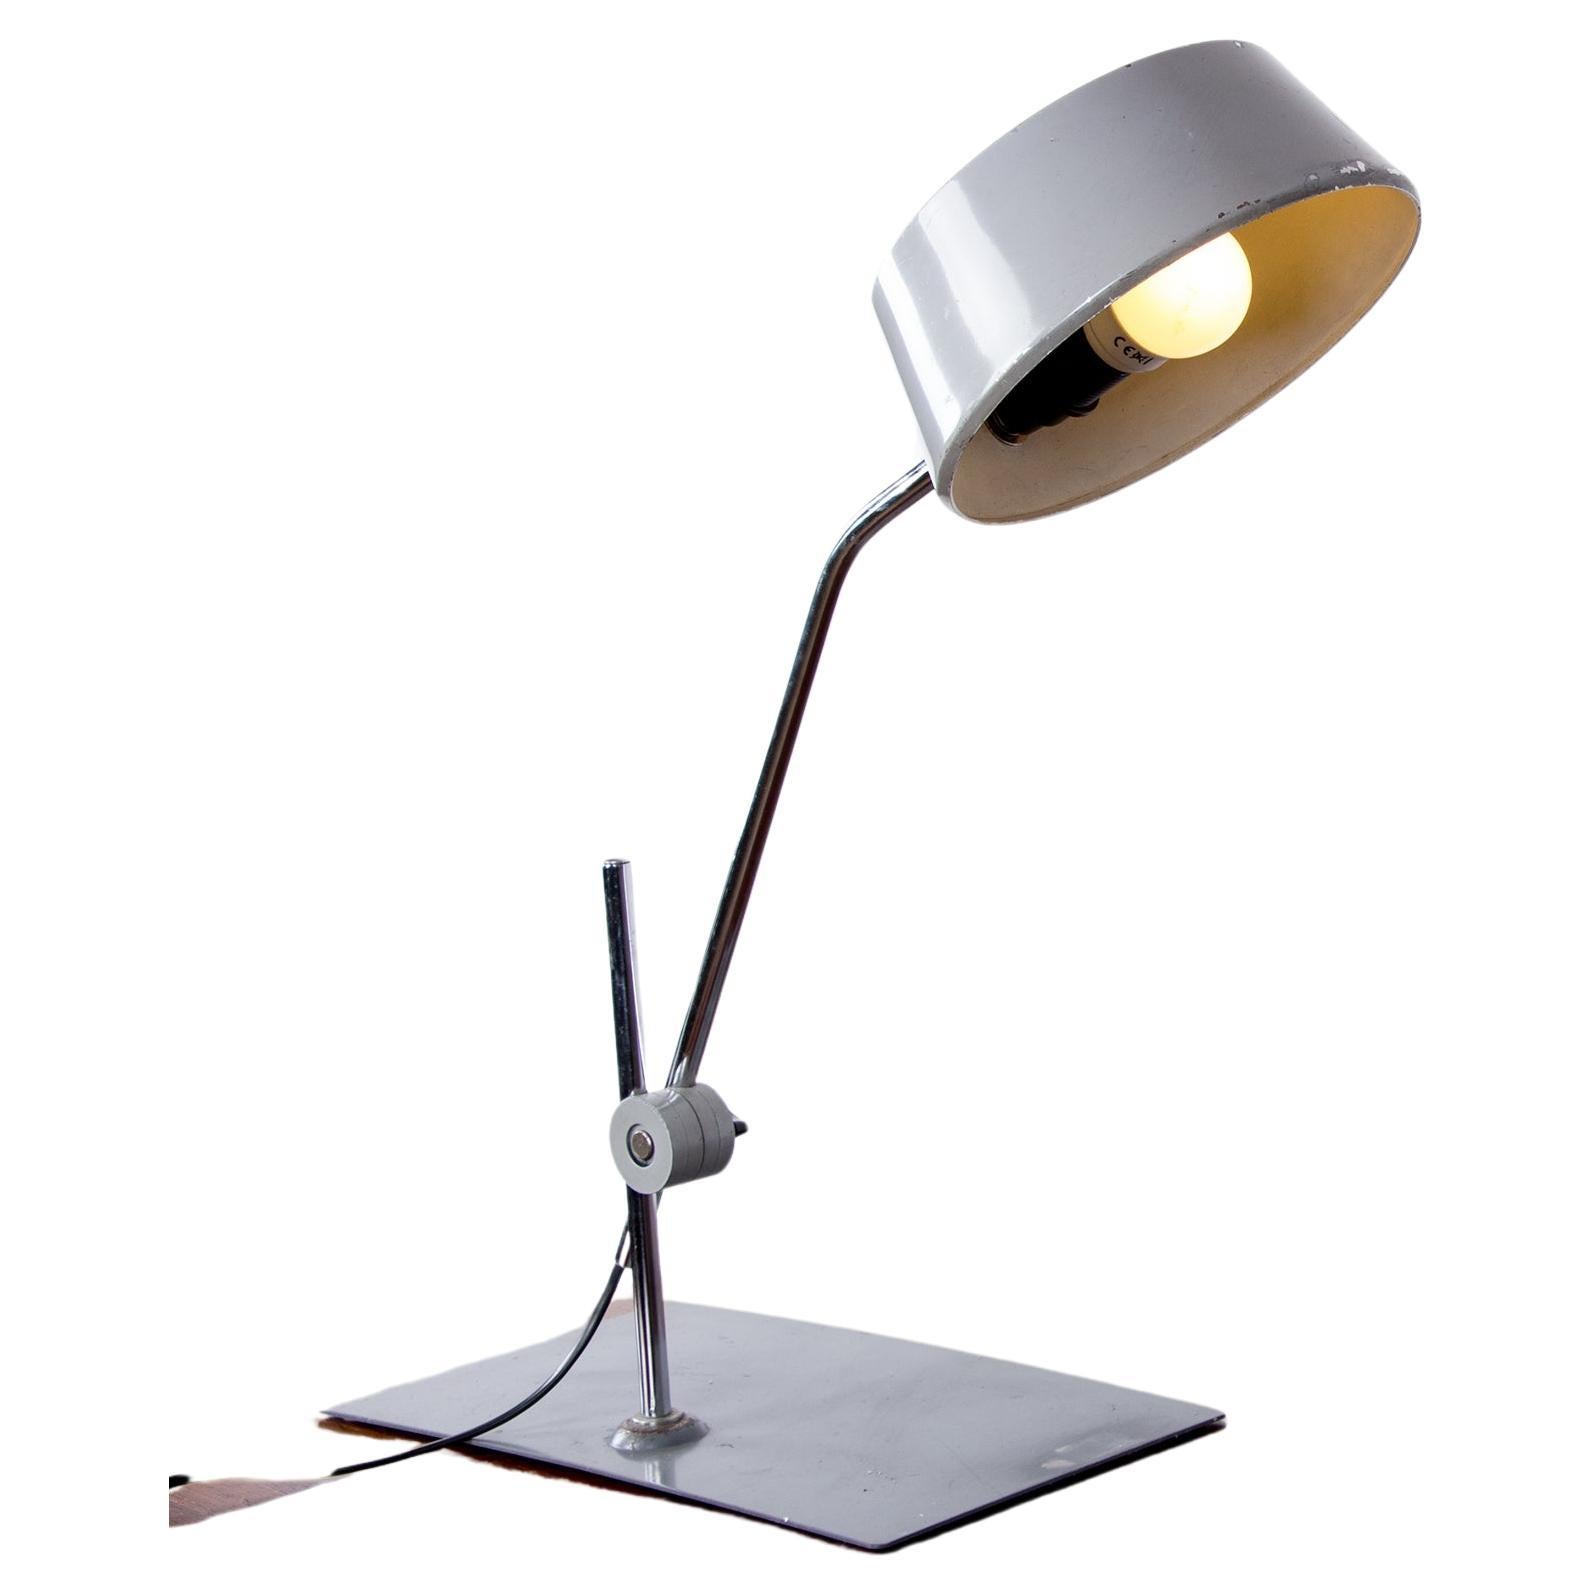 Jumo desk lamp with pendulum, articulable, in metal by Charlotte Perriand.